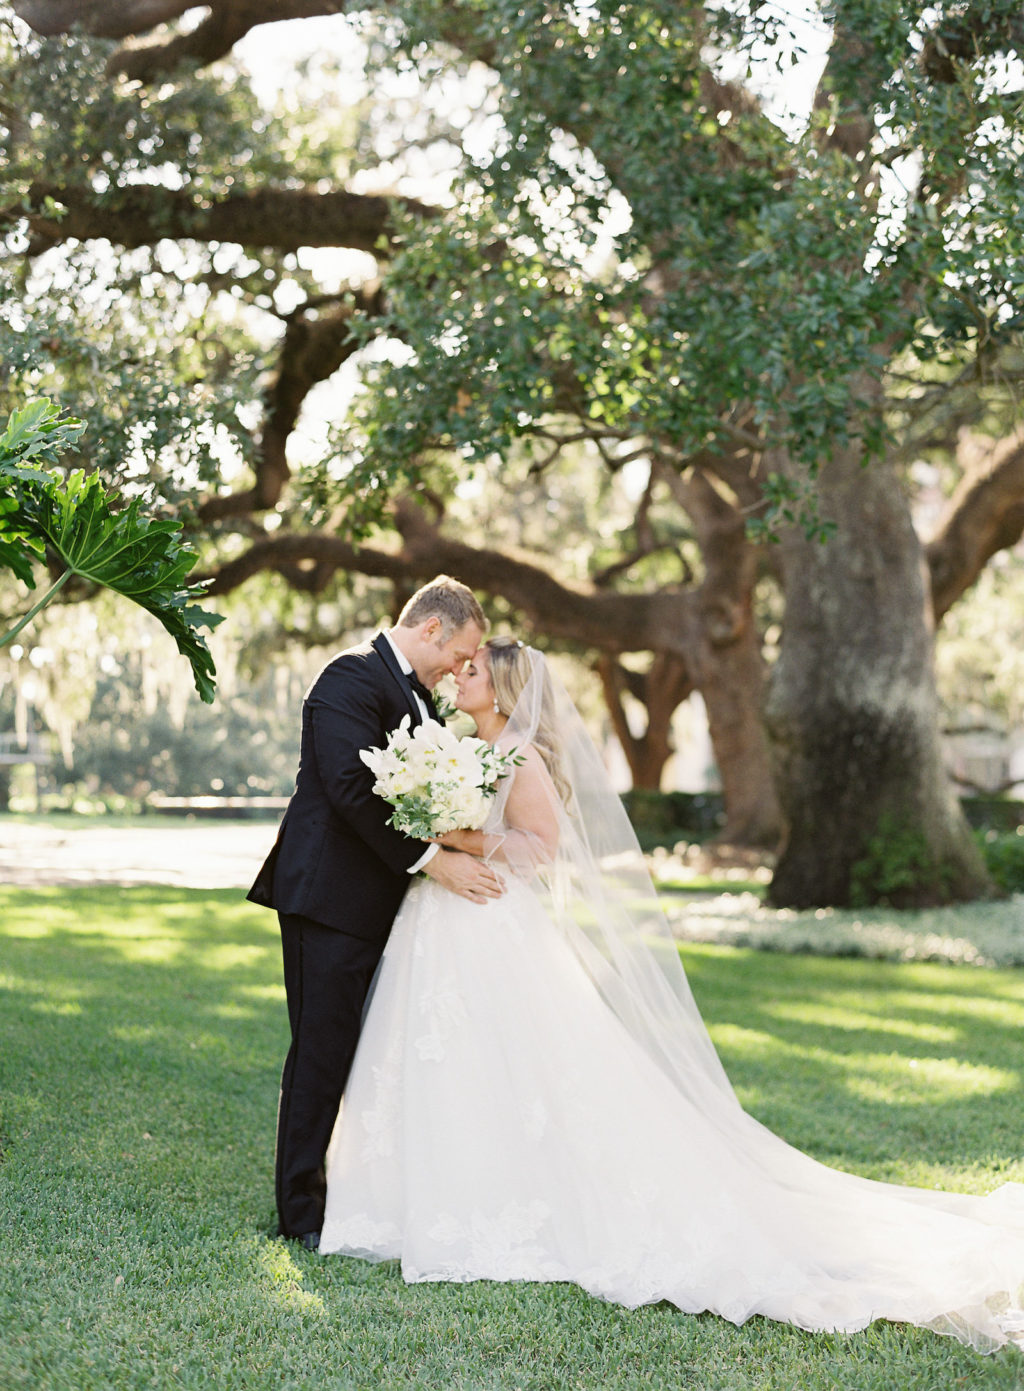 Traditional Bride in Ballgown Lace and Tulle Wedding Dress and Groom in Black Tuxedo